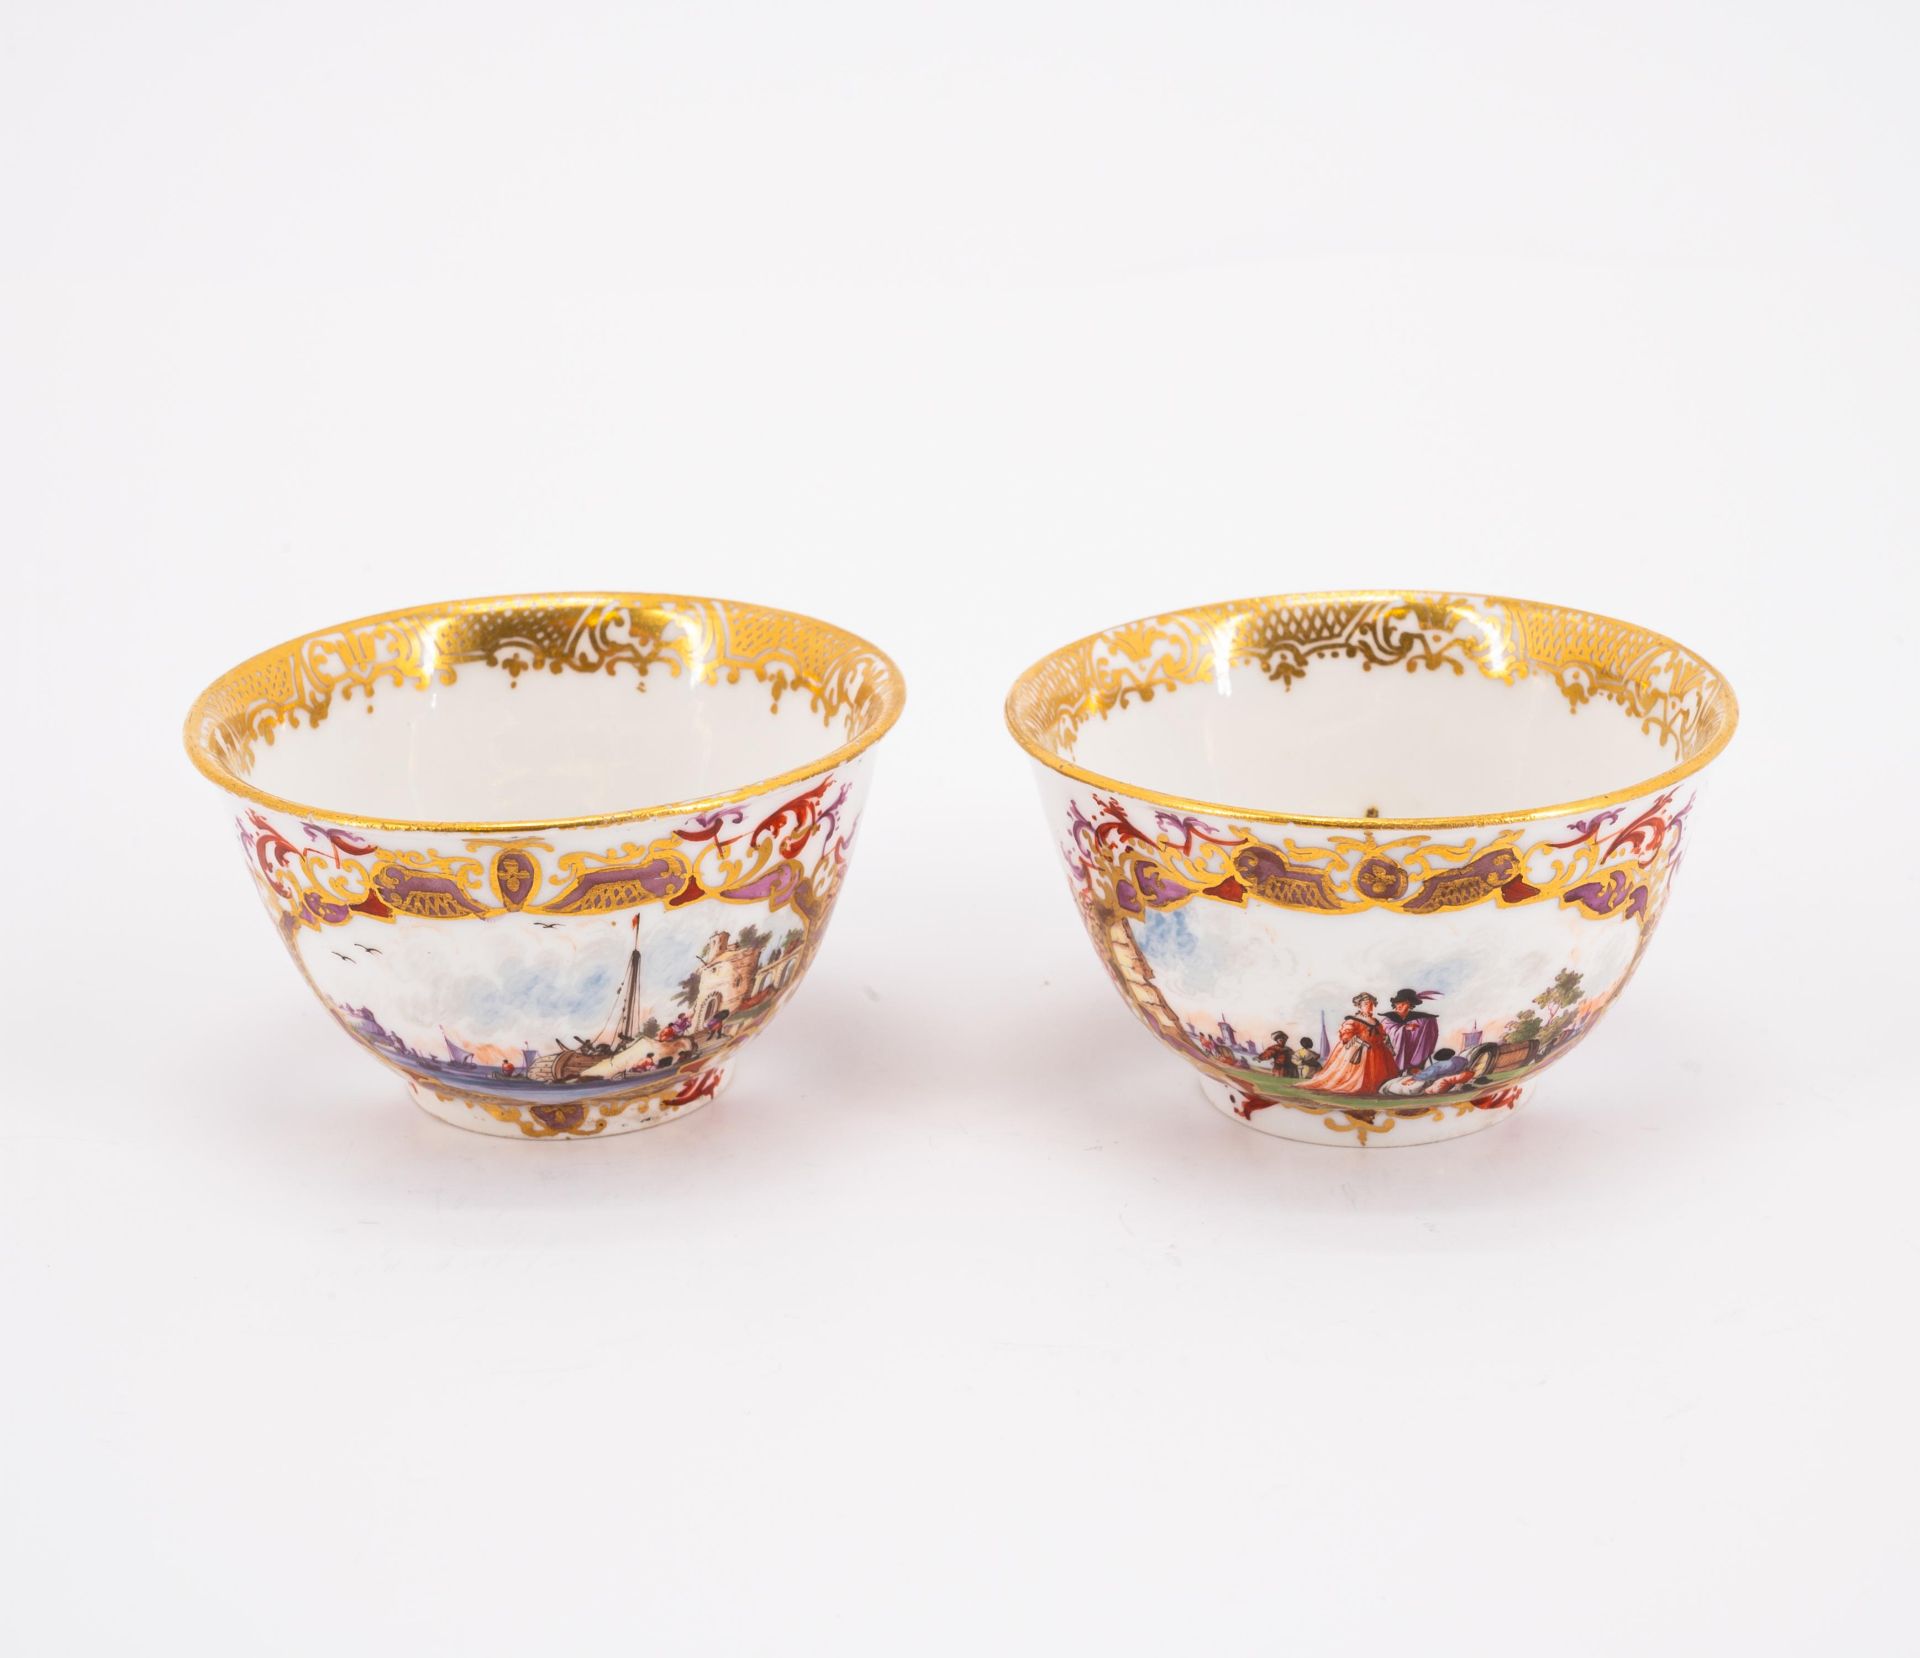 Meissen: PAIR OF PORCELAIN TEA BOWLS AND SAUCERS WITH MERCHANT NAVY SCENES - Image 3 of 8